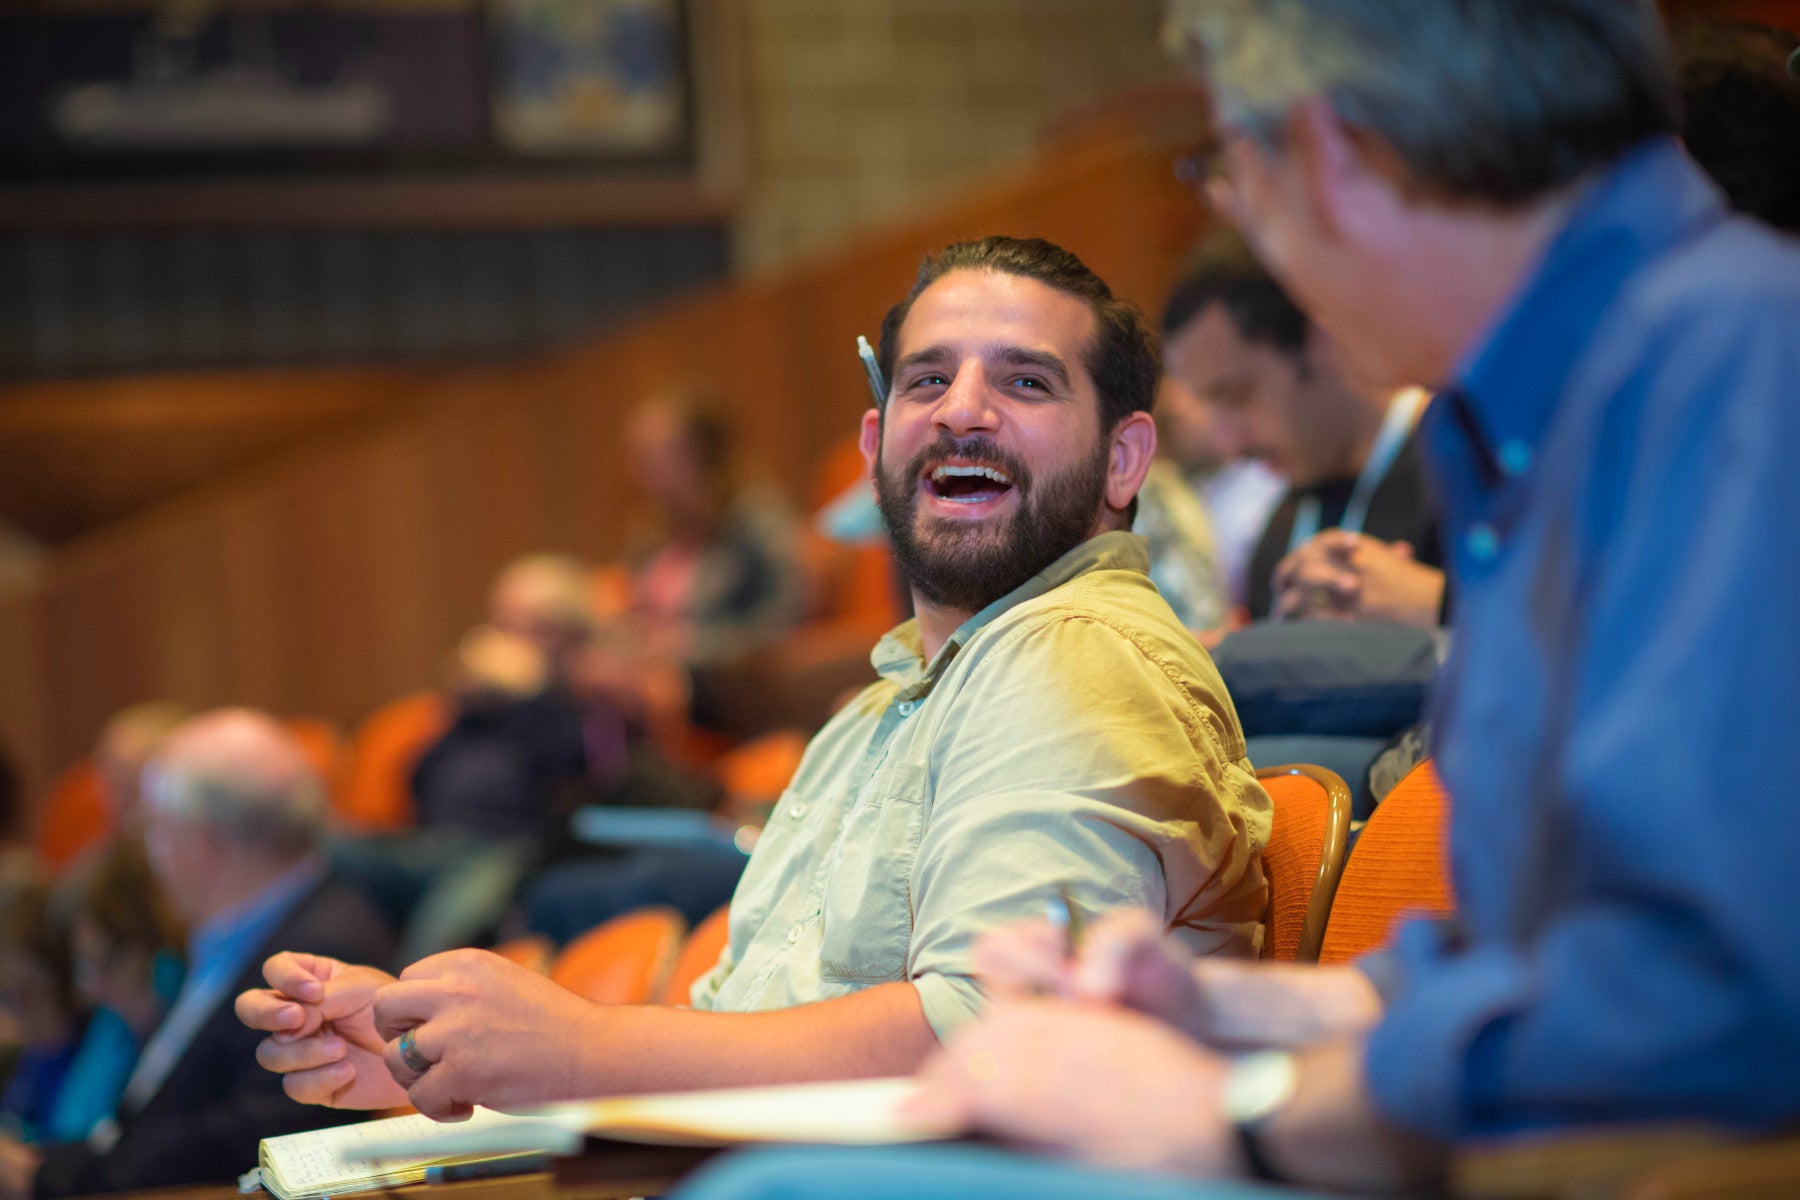 Person sitting in an auditorium and smiling at another